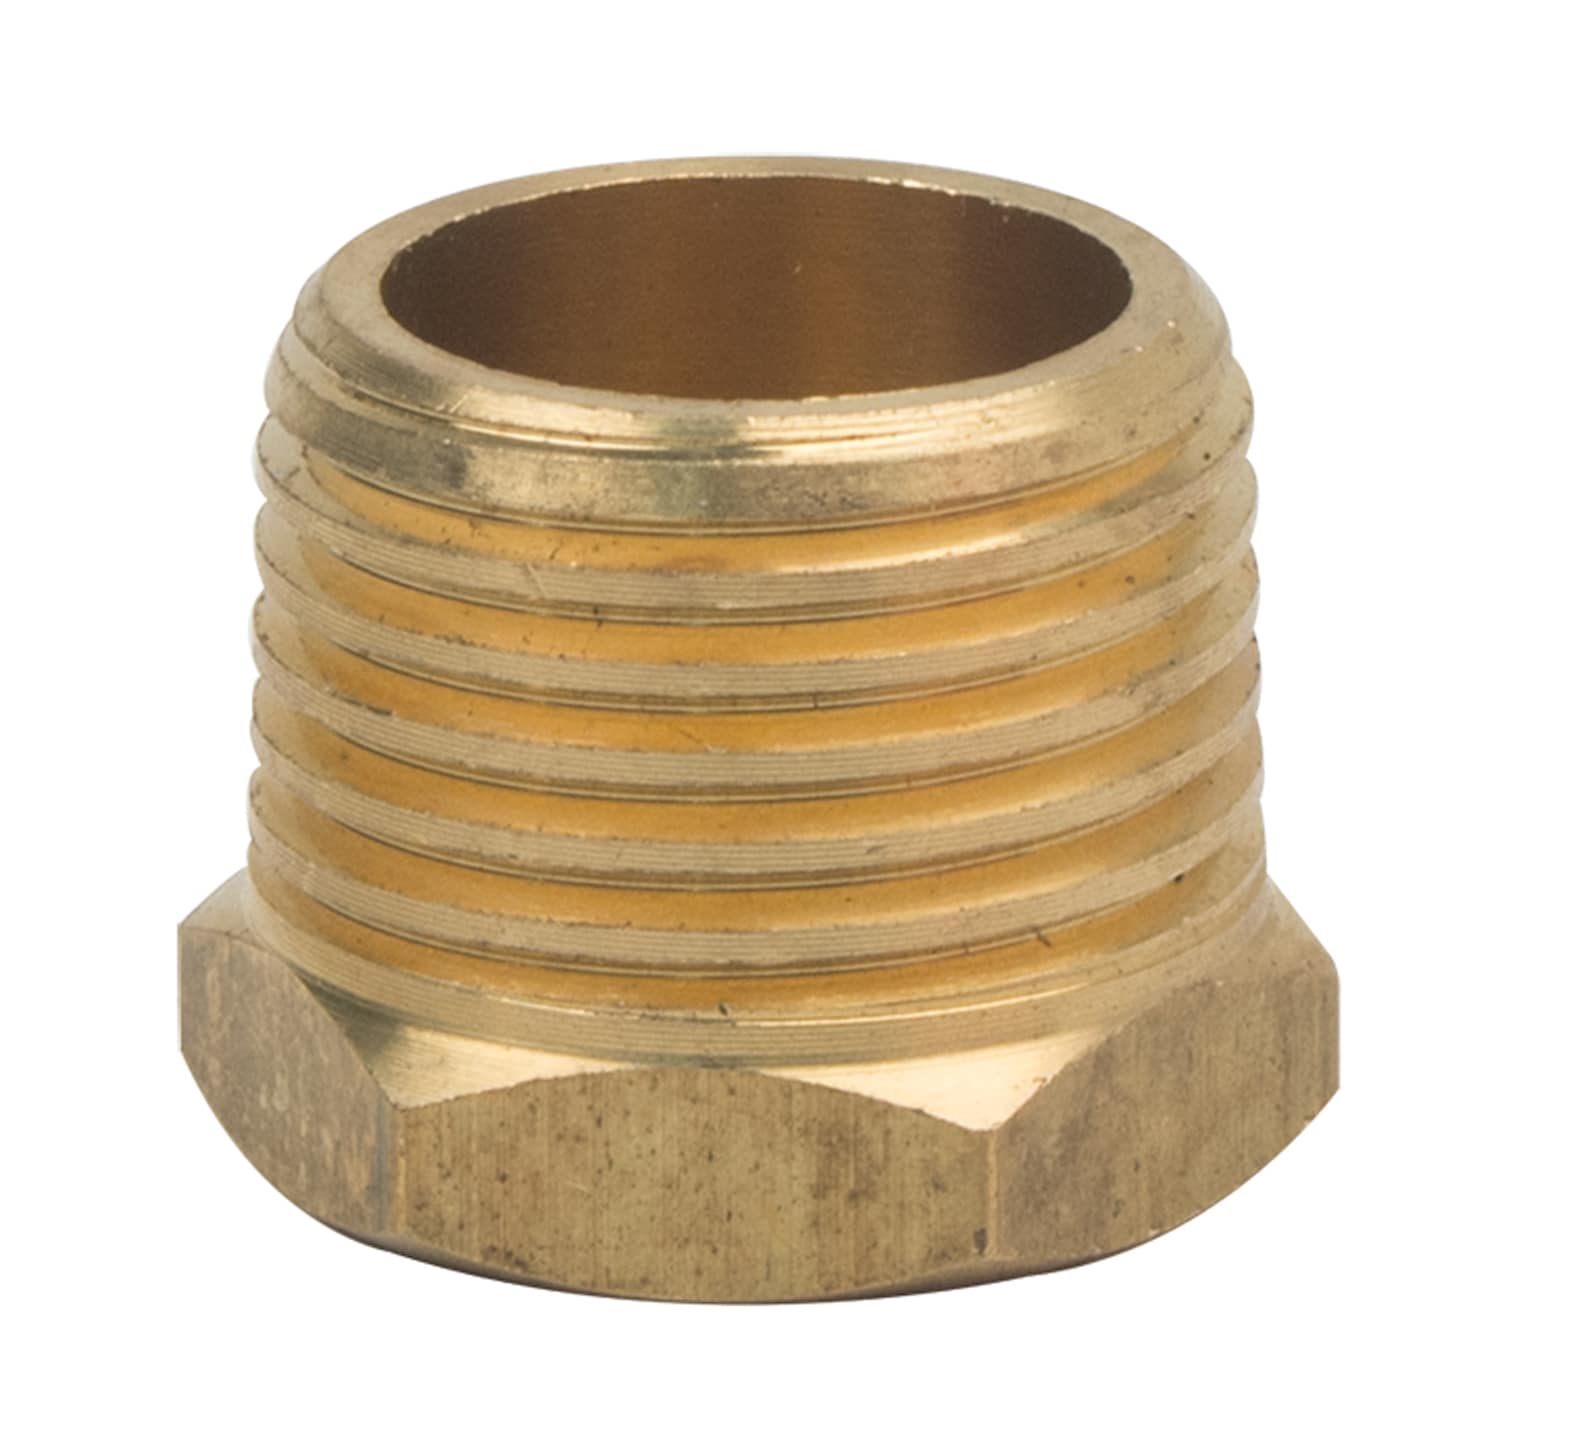 BrassCraft 1/2-in x 3/8-in Threaded Adapter Bushing Fitting at